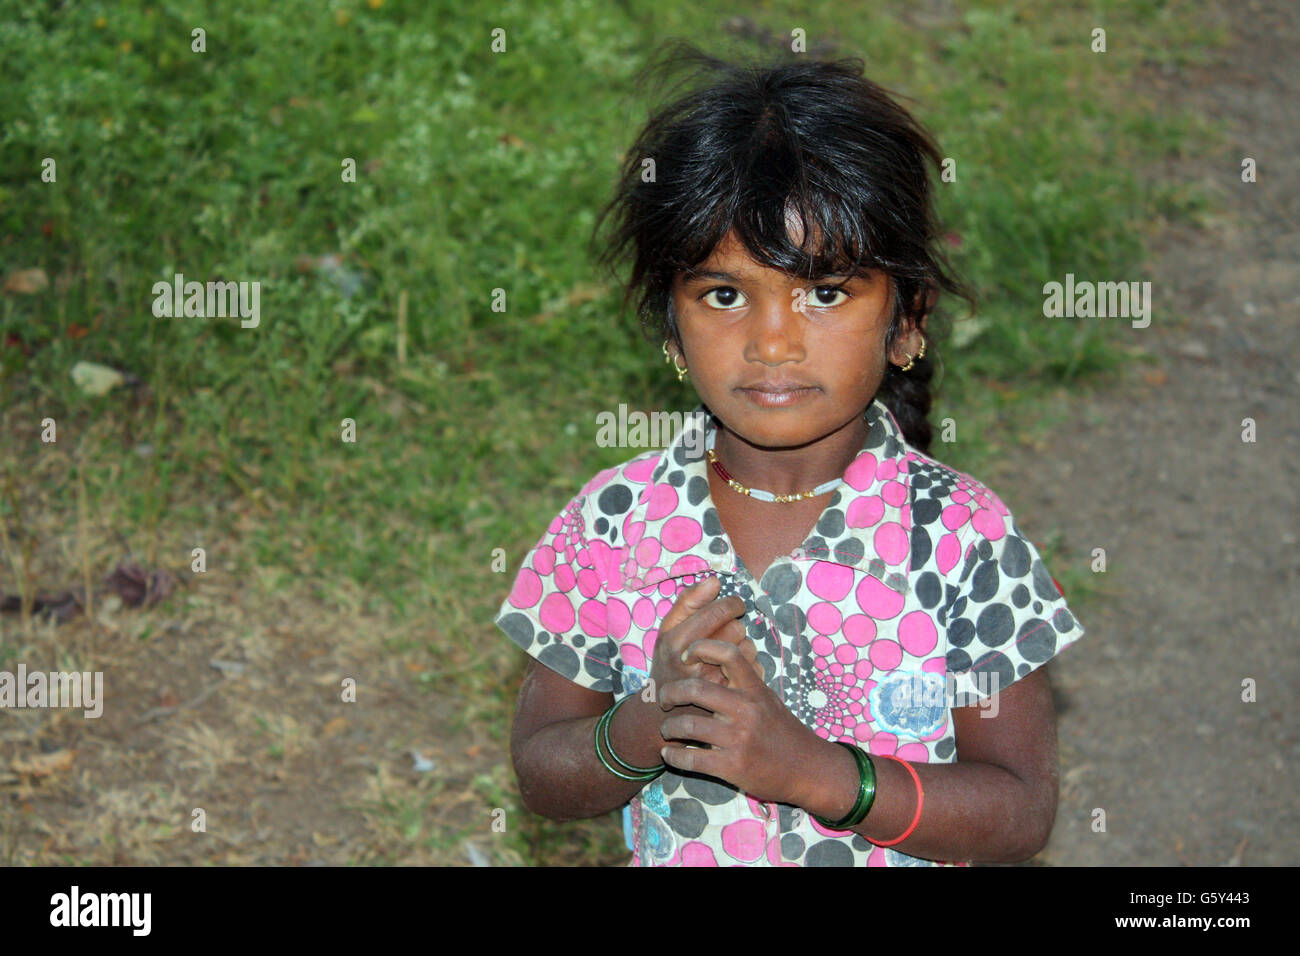 A poor Indian village girl covered with dirt, in the outdoors. Stock Photo